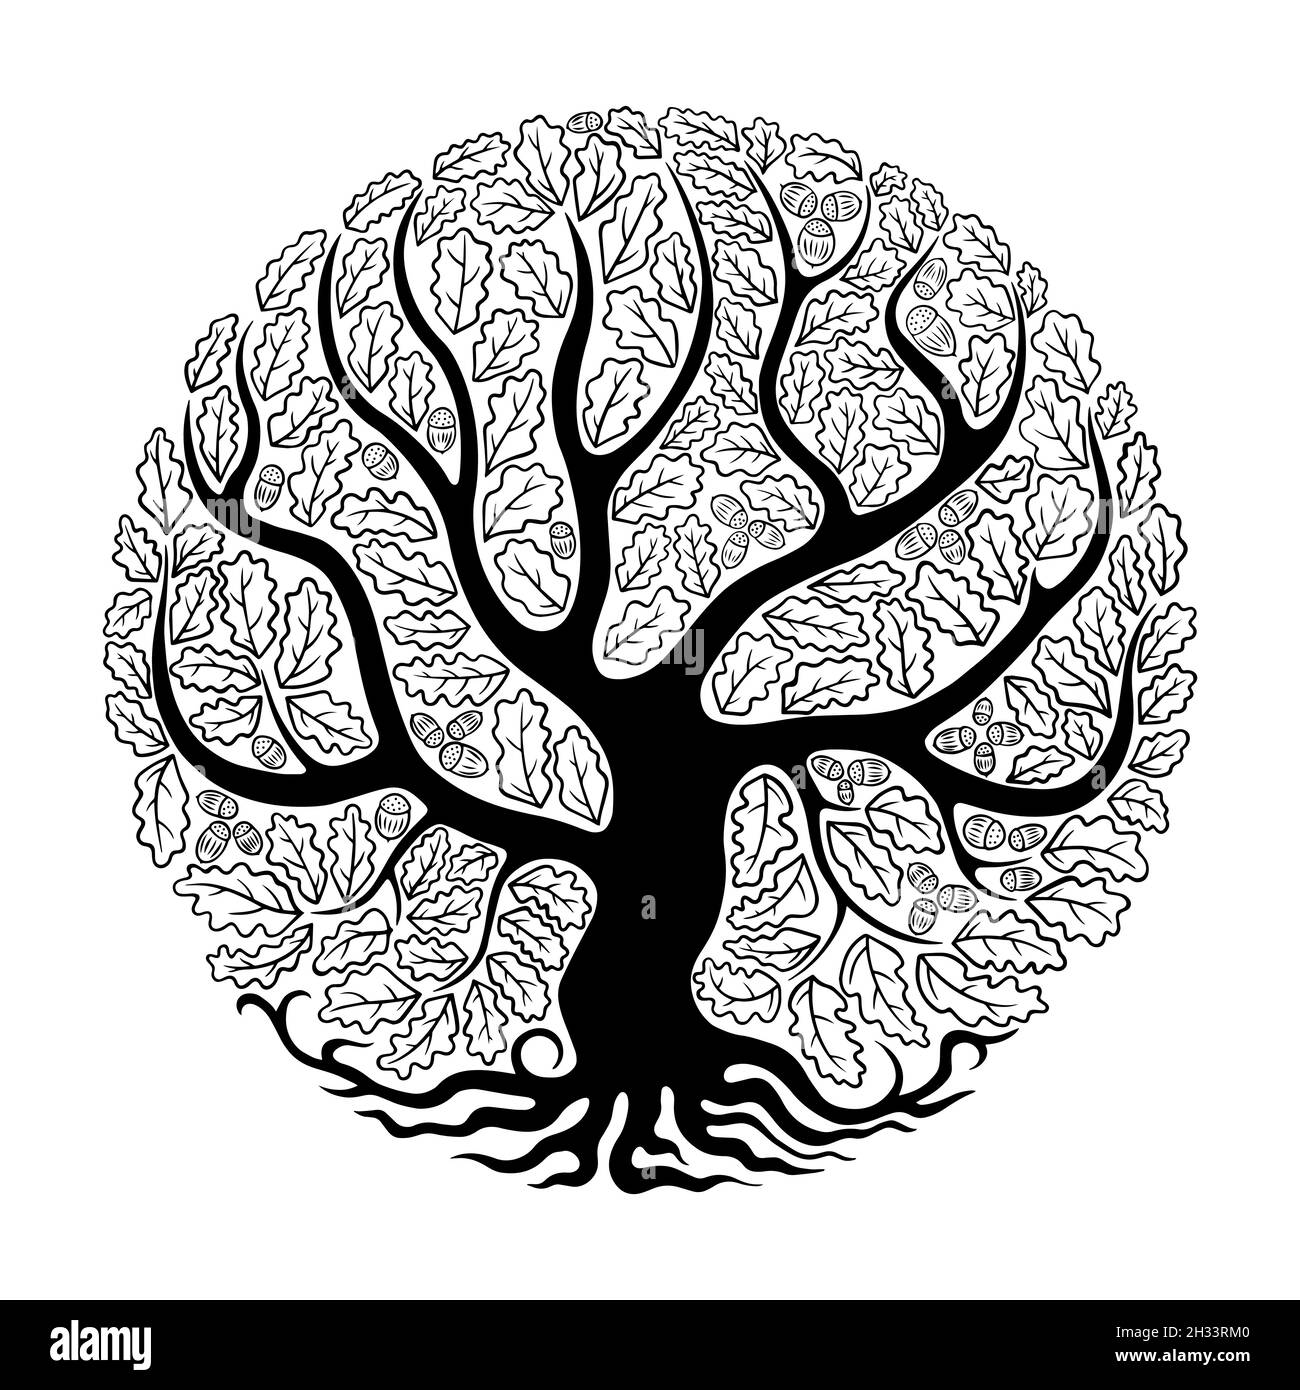 Oak hand drawn silhouette in circle shape. Vector illustration. Stock Vector